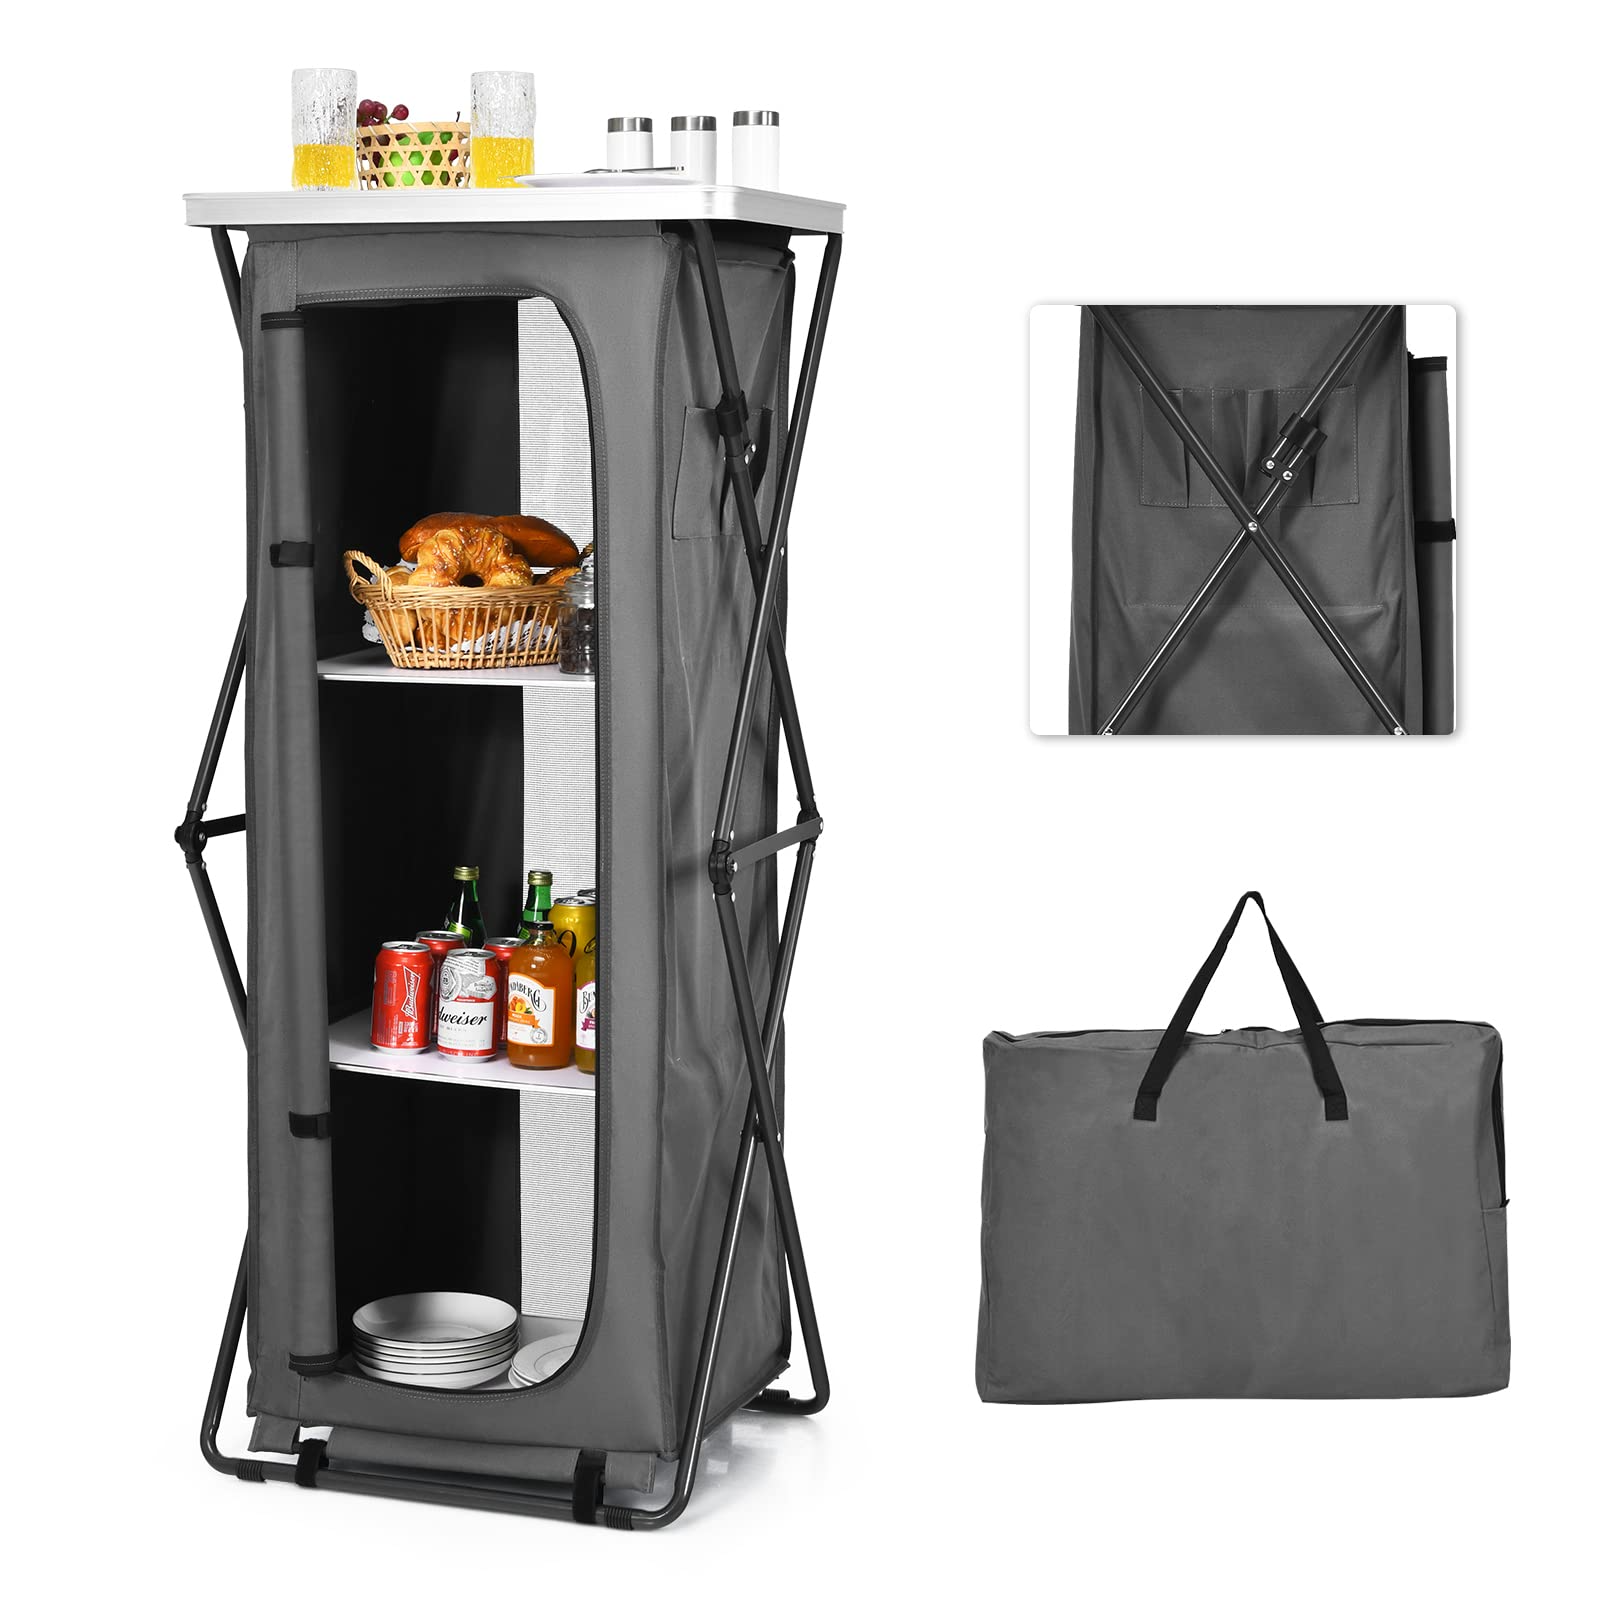 Goplus Folding Camping Storage Cabinet, Pop Up Outdoor Camping Kitchen Station with Large 3-Tier Storage Organizer